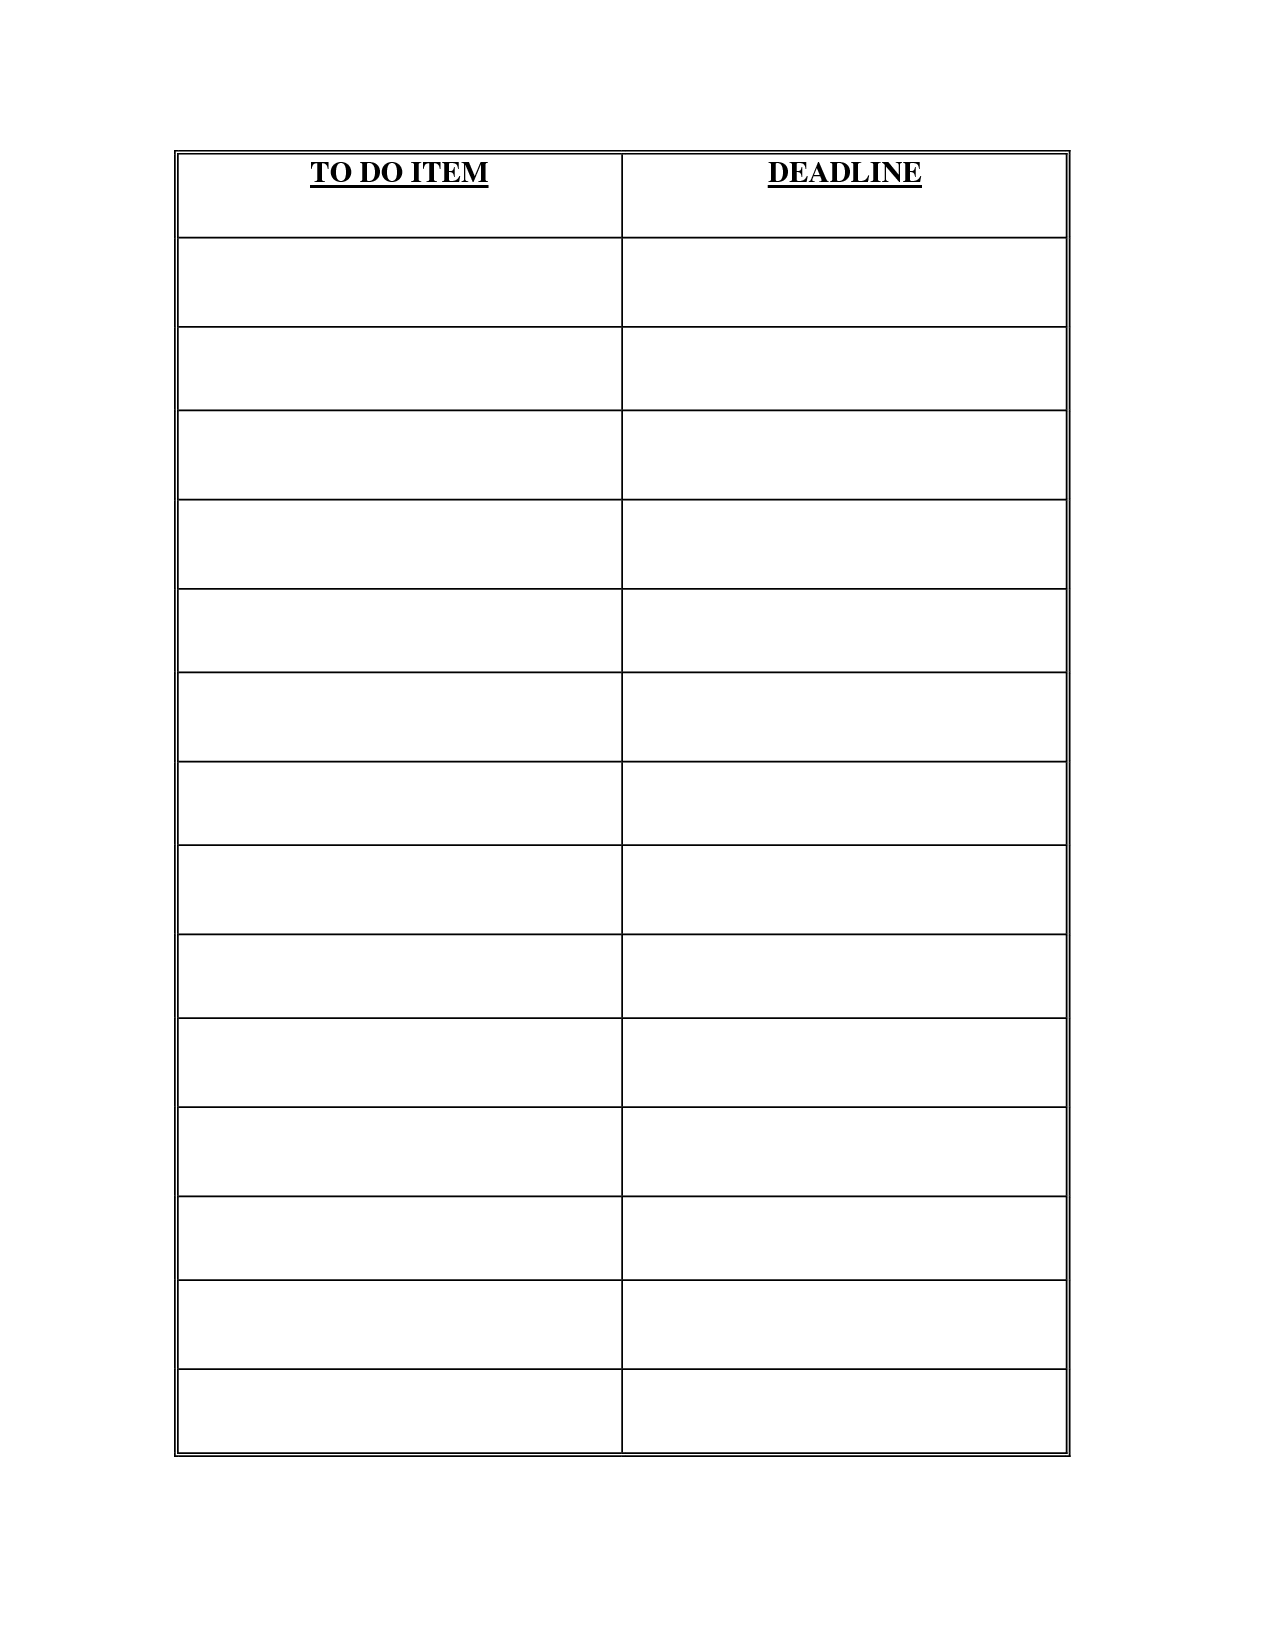 6-best-images-of-printable-to-do-to-get-organized-lists-printable-to-do-list-templates-free